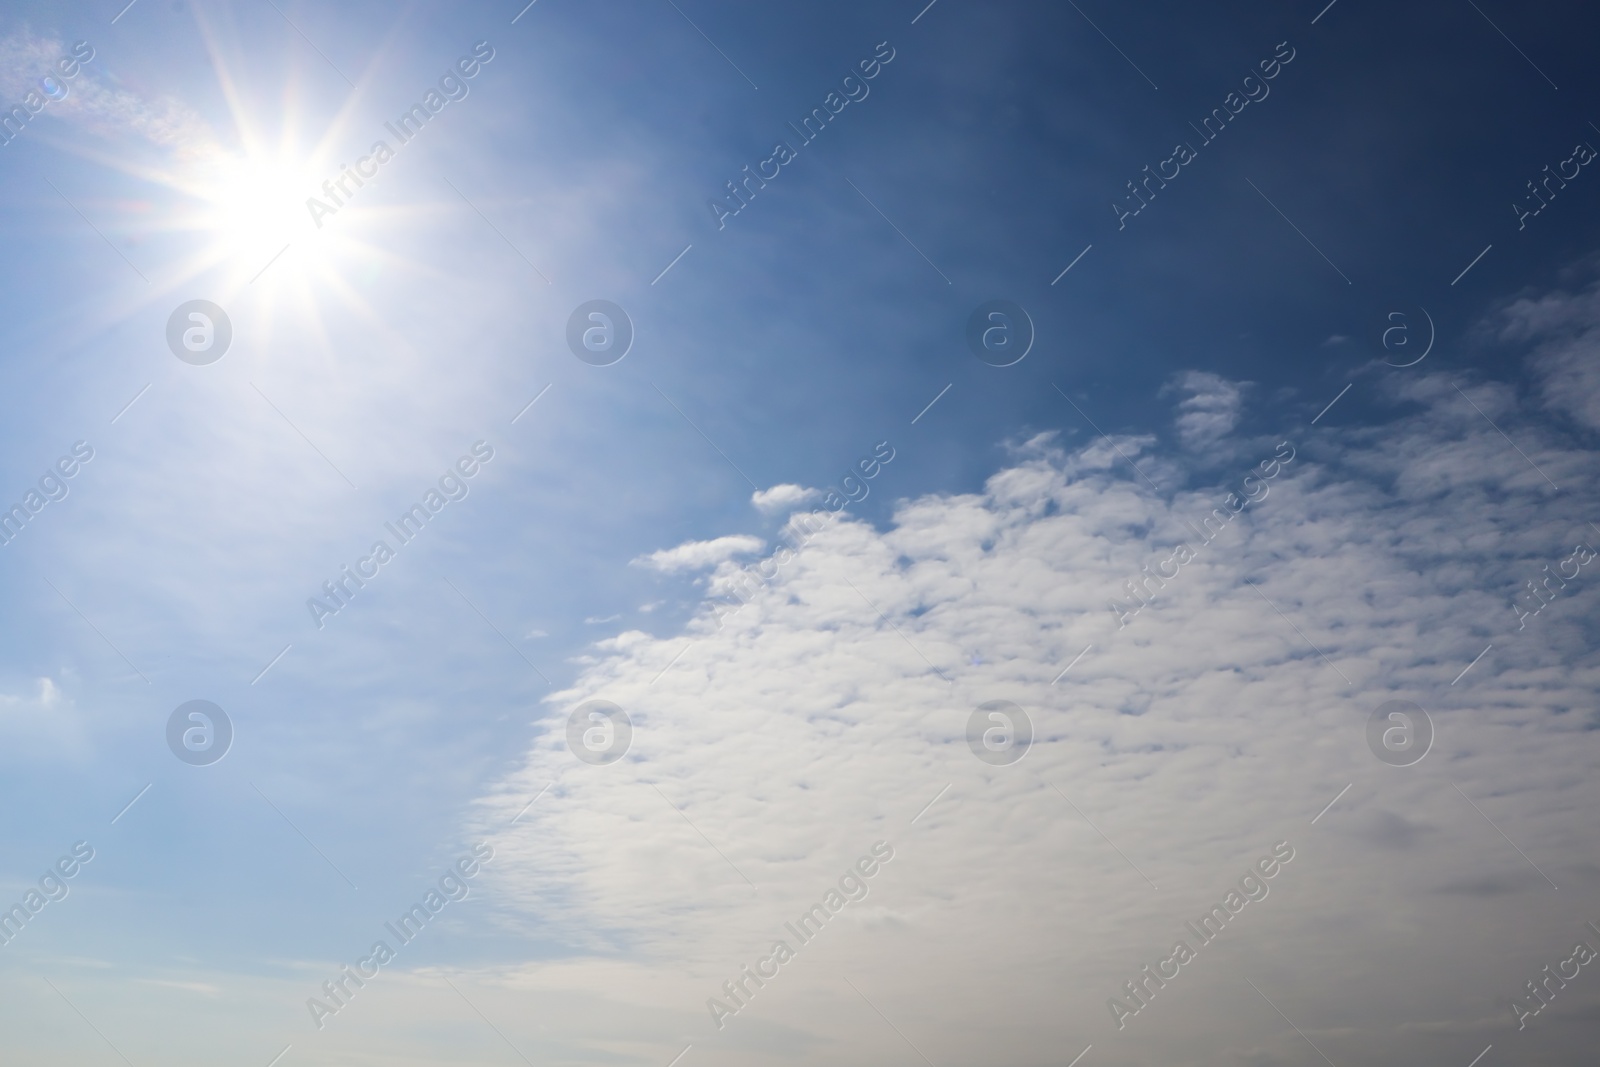 Photo of Sun and white clouds in blue sky outdoors